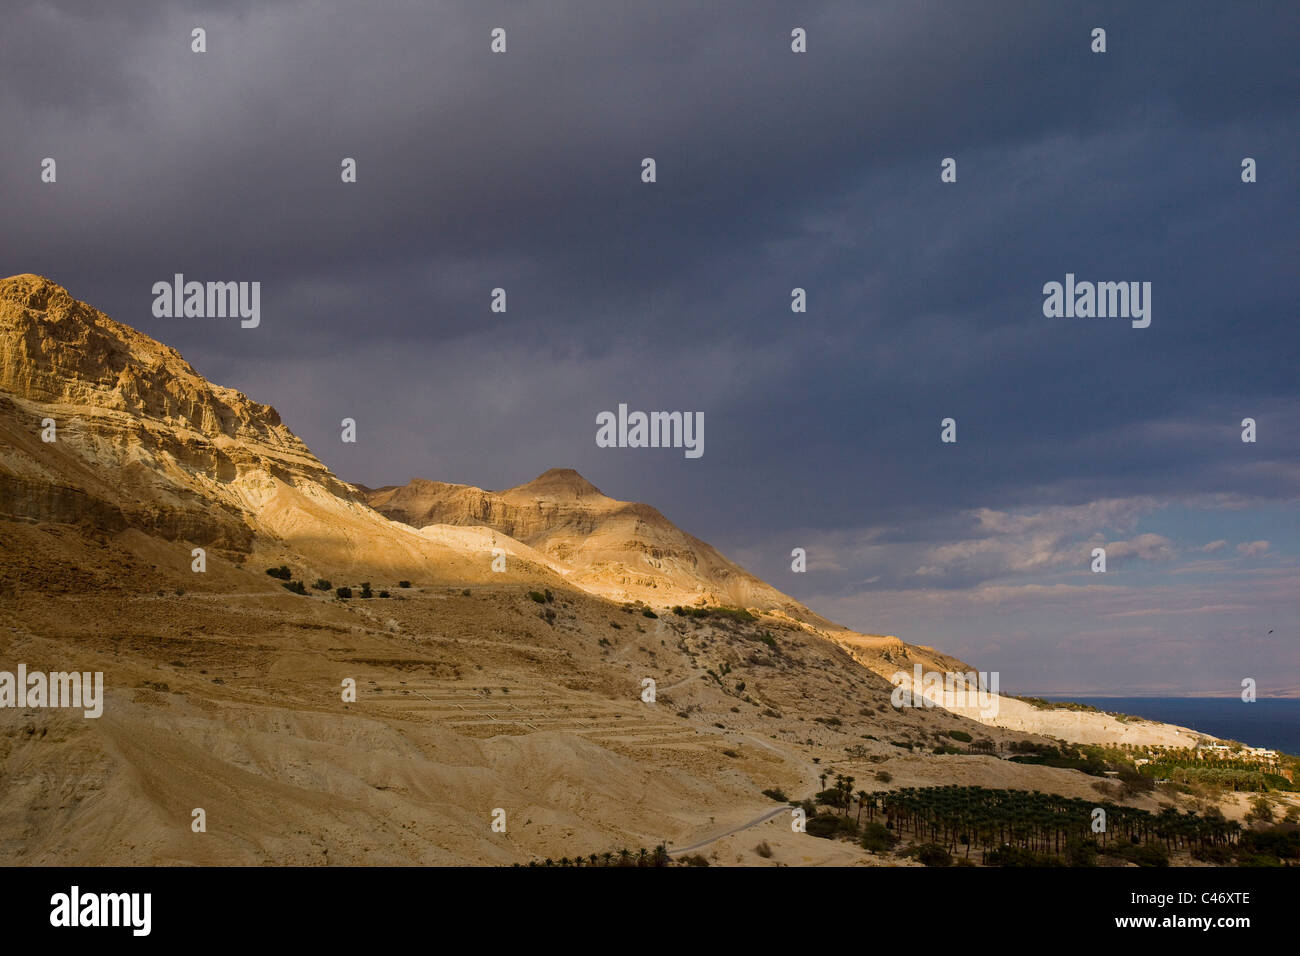 Photograph of the mountains of the Judean Desert which surround the Dead sea Stock Photo